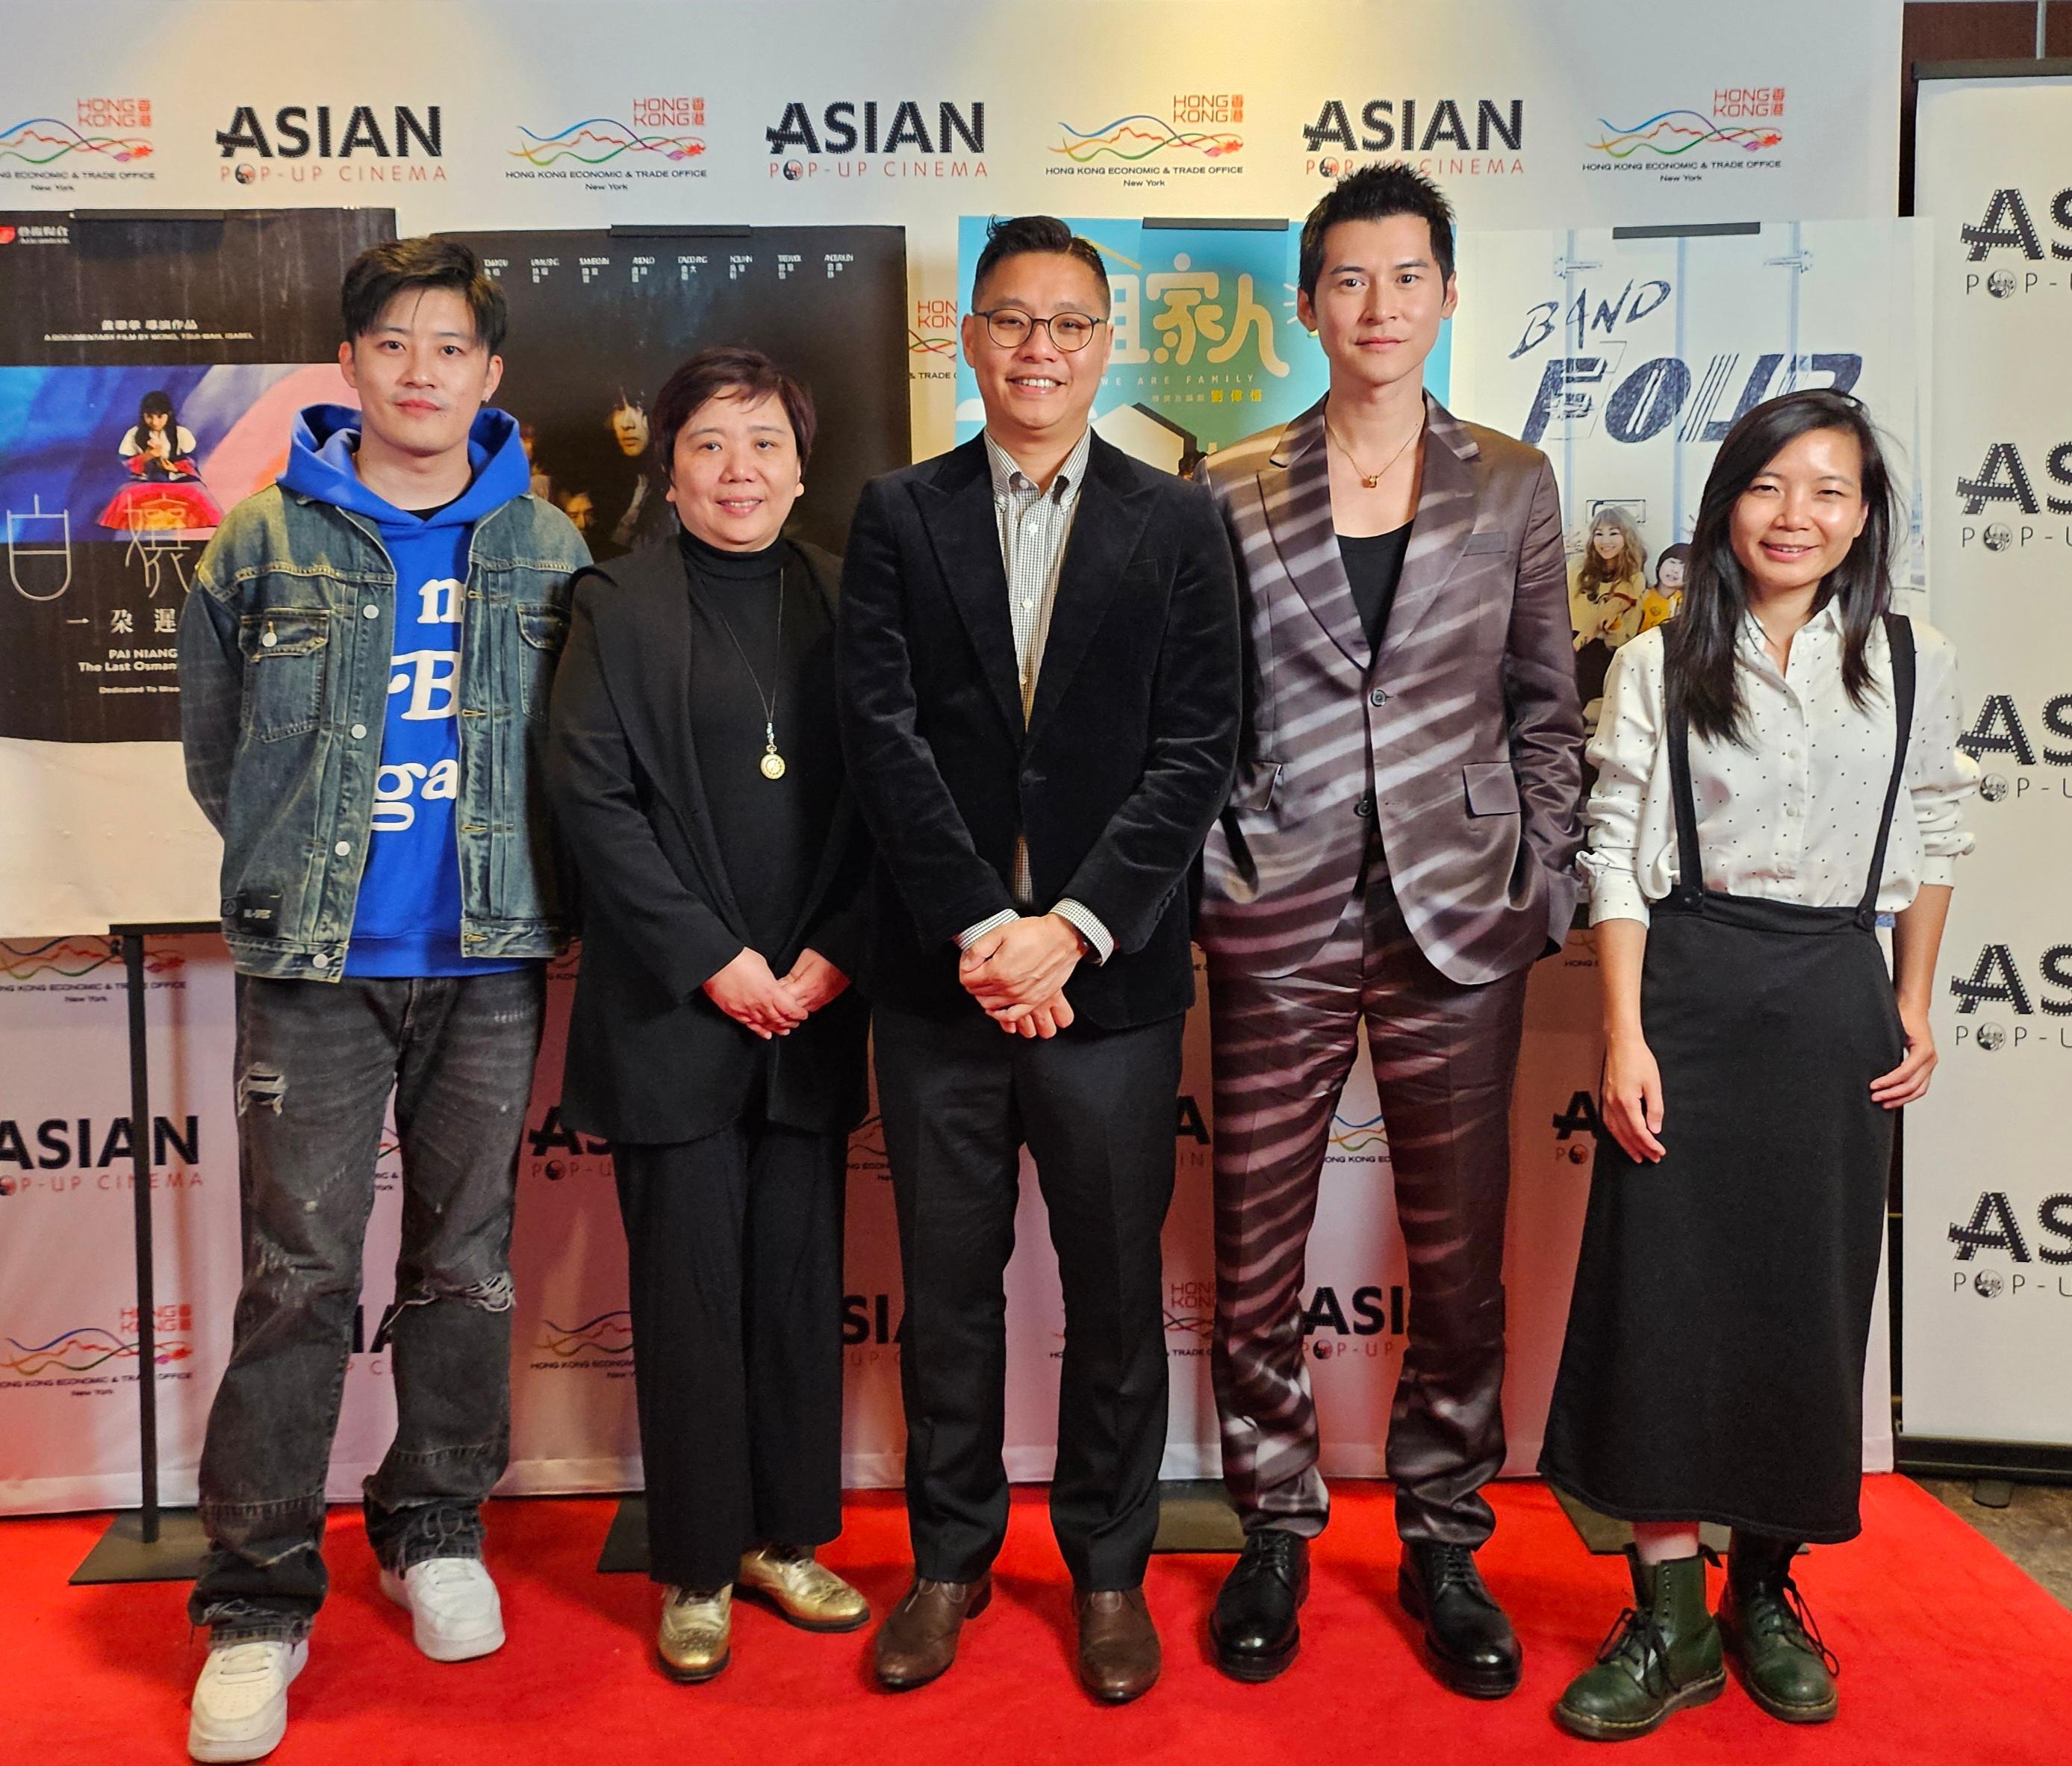 Hong Kong films highlighted the closing weekend (April 19 to 21, Chicago time) of Season 18 of Chicago’s Asian Pop-Up Cinema (APUC). Photo shows actor Carlos Chan (second right); and directors Isabel Wong (second left), Benny Lau (centre), Lai Yan-chi (first right) and Kelvin Shum (first left) whose works were featured in the Hong Kong Cinema Showcase of the APUC.